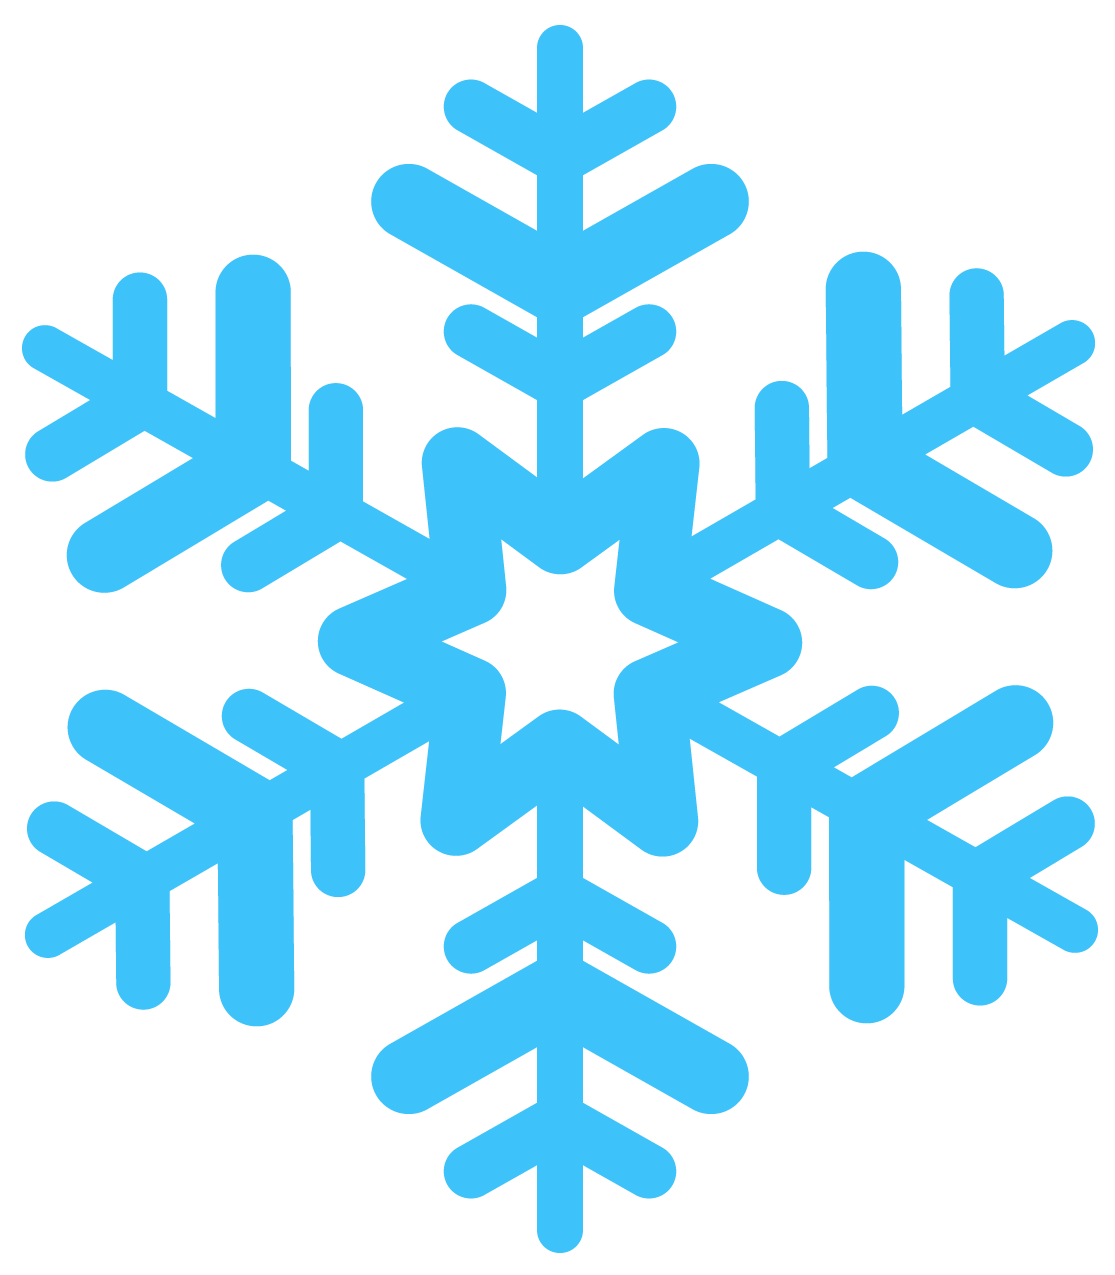 White Snowflake PNG Transparent Images Free Download, Vector Files